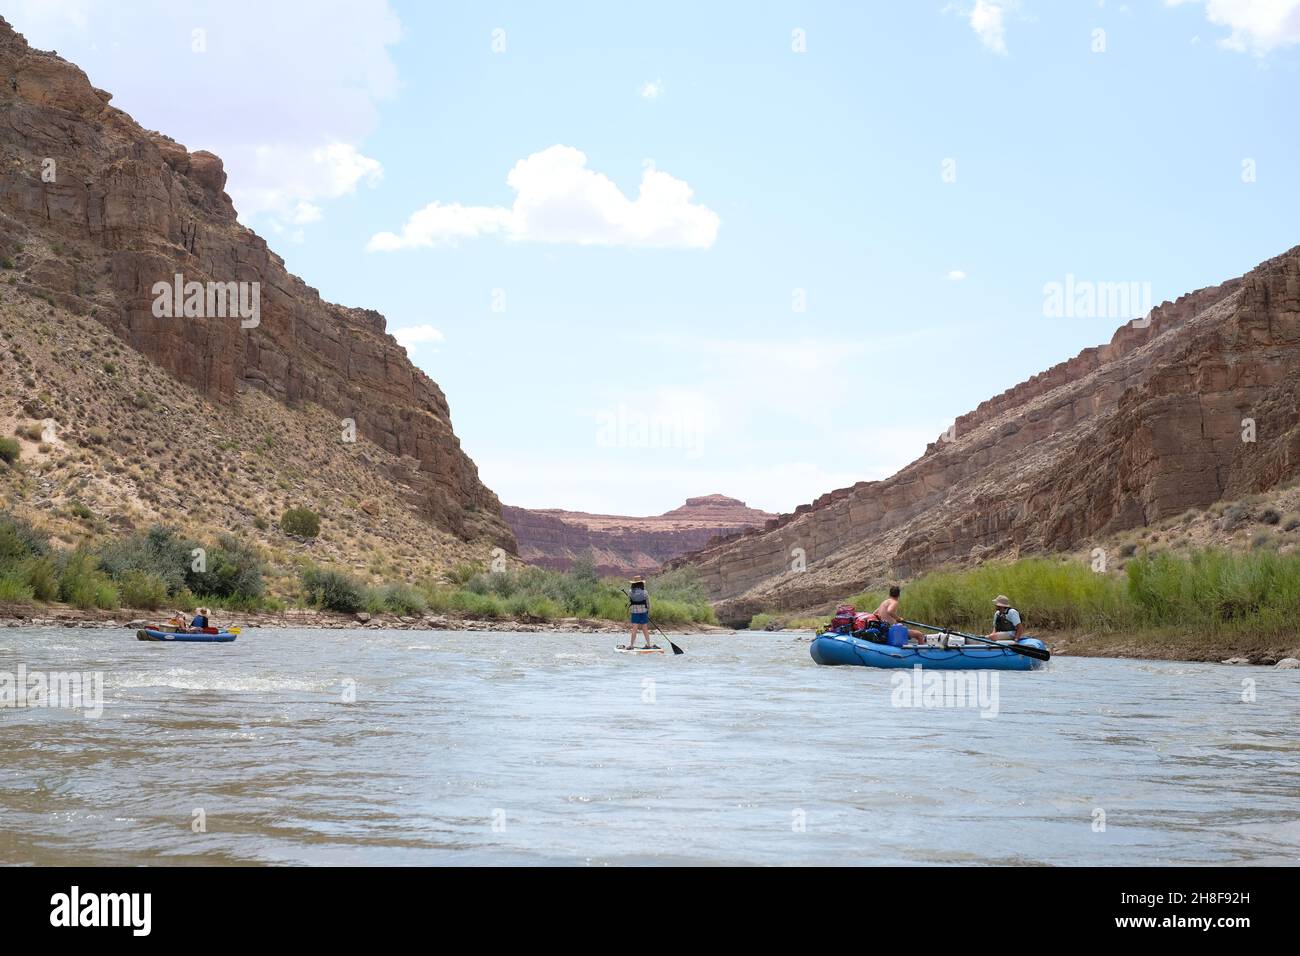 Group multi-day white water rafting trip kayaking and SUPping down the San Juan River through Bears Ears National Monument, Utah Stock Photo